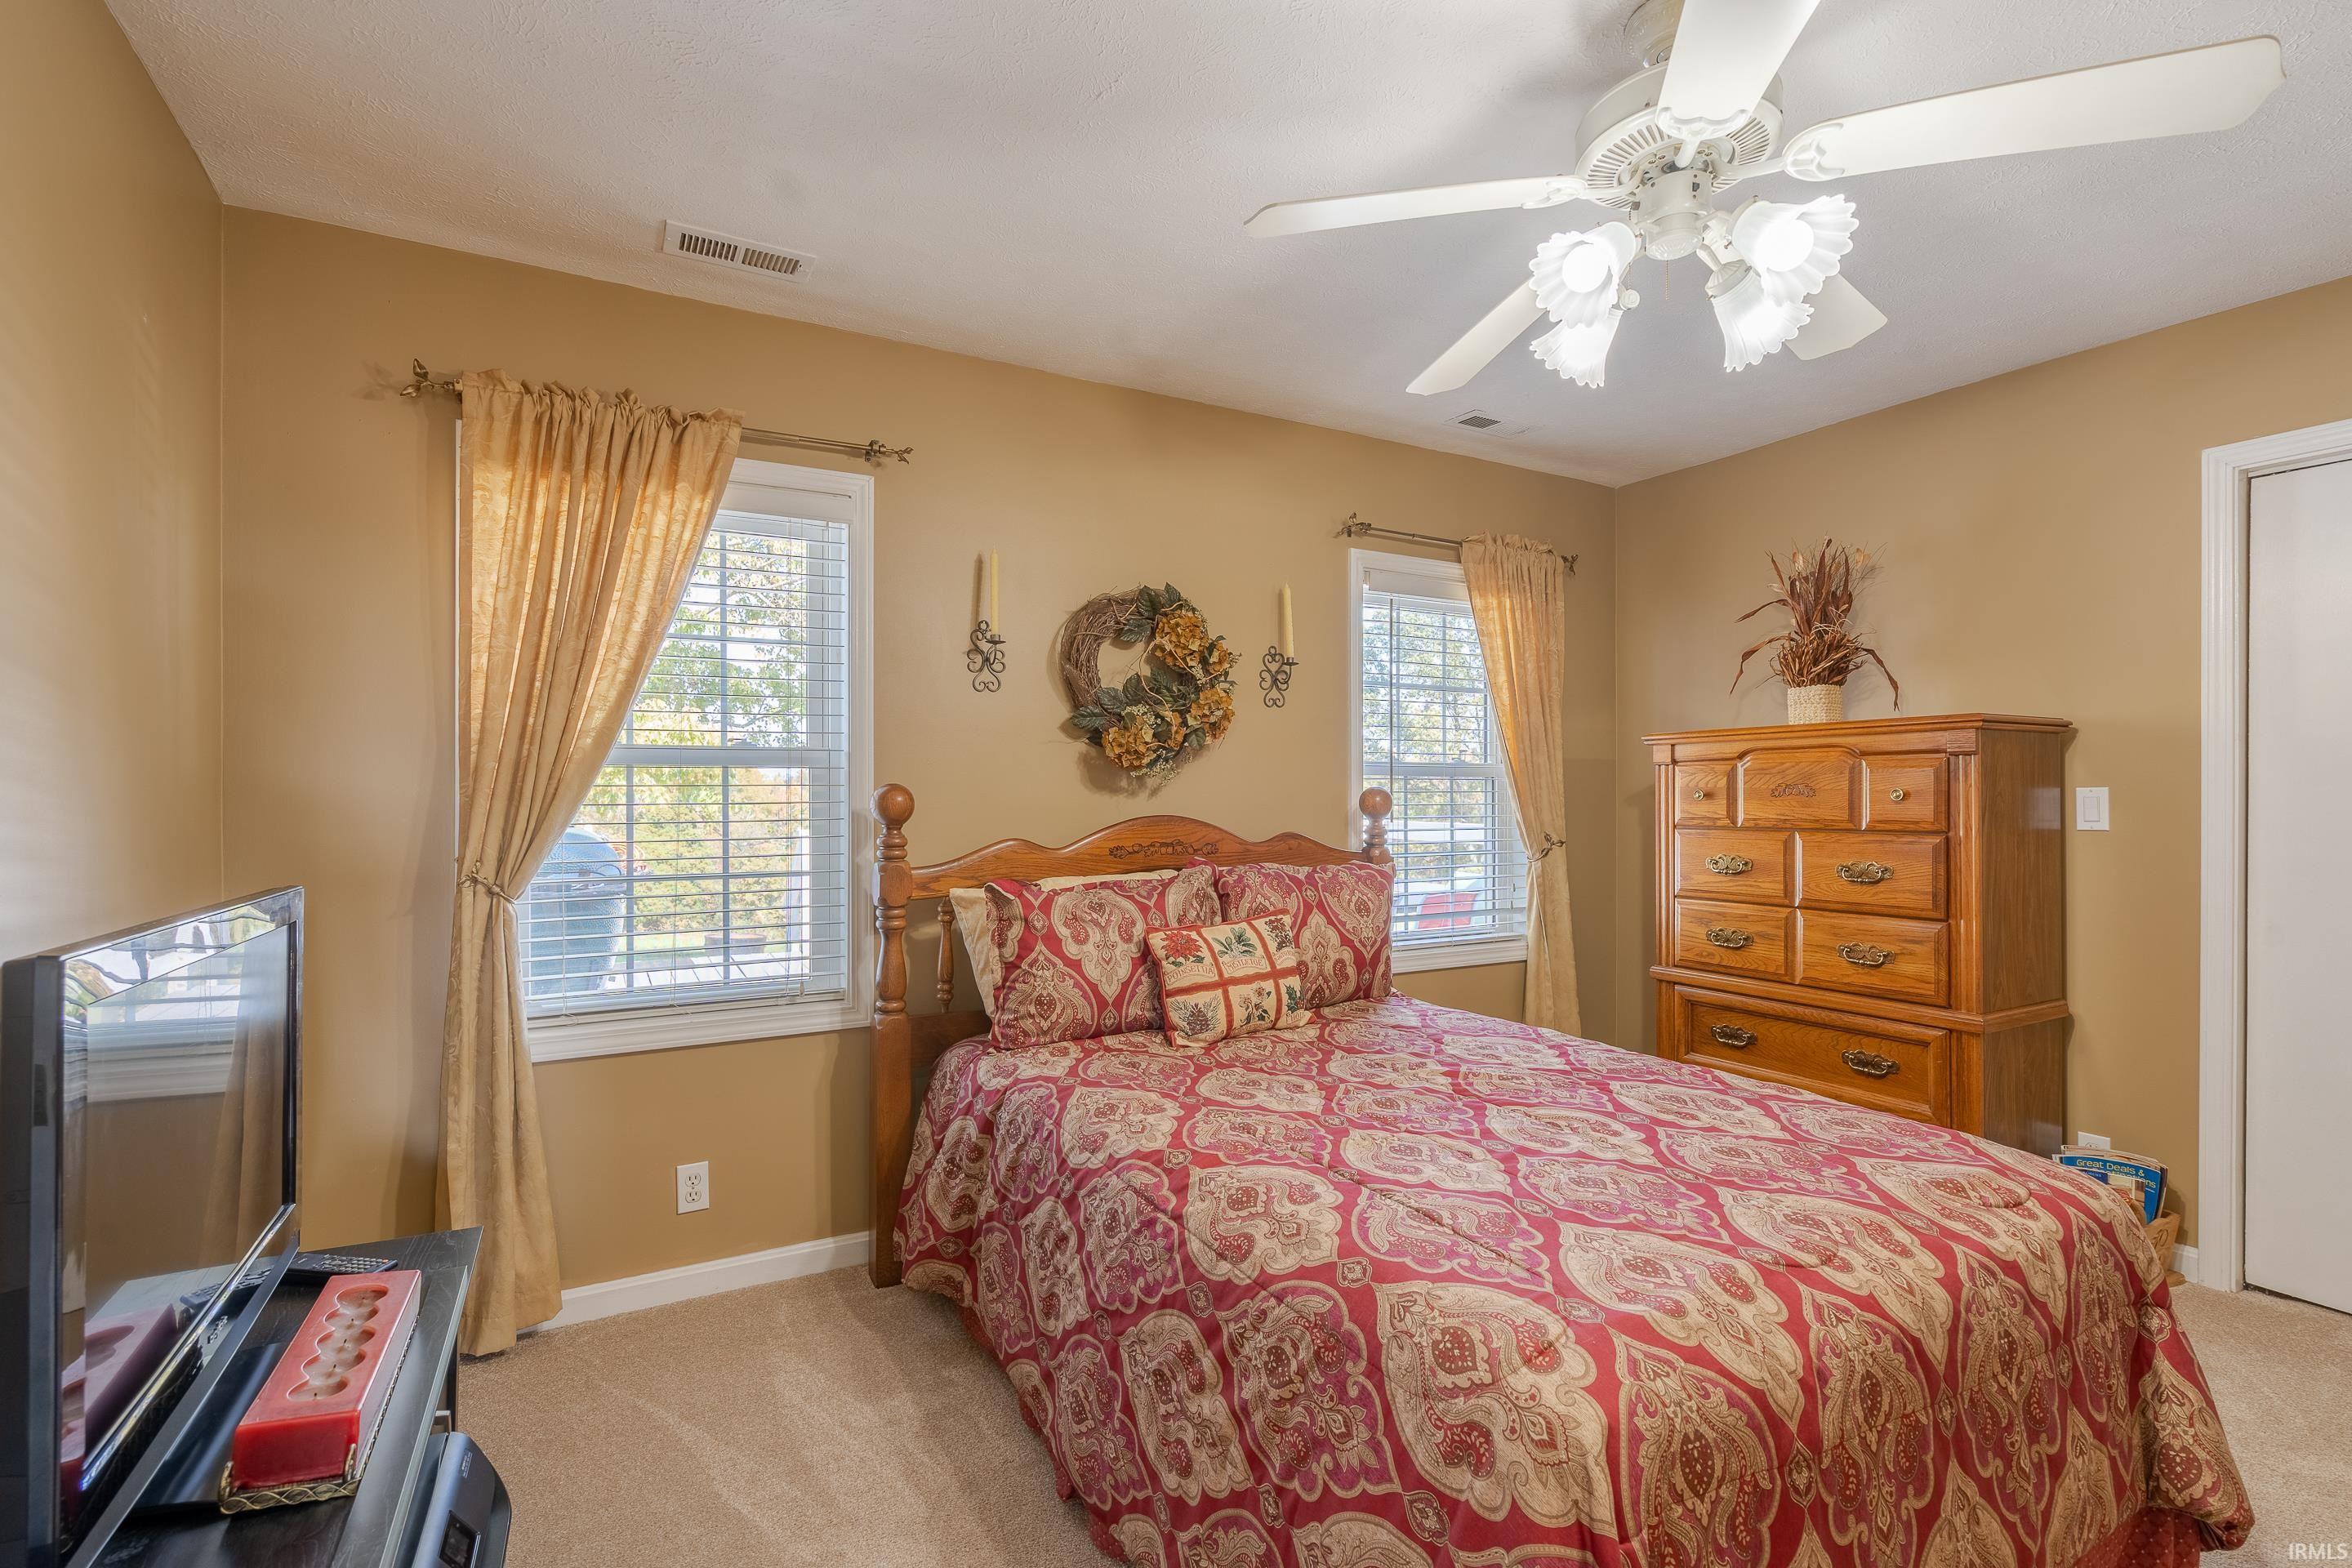 CEILING FAN, CARPETING AND A LARGE 6 FOOT CLOSET ARE JUST SOME OF THIS BEDROOMS GREAT FEATURES.